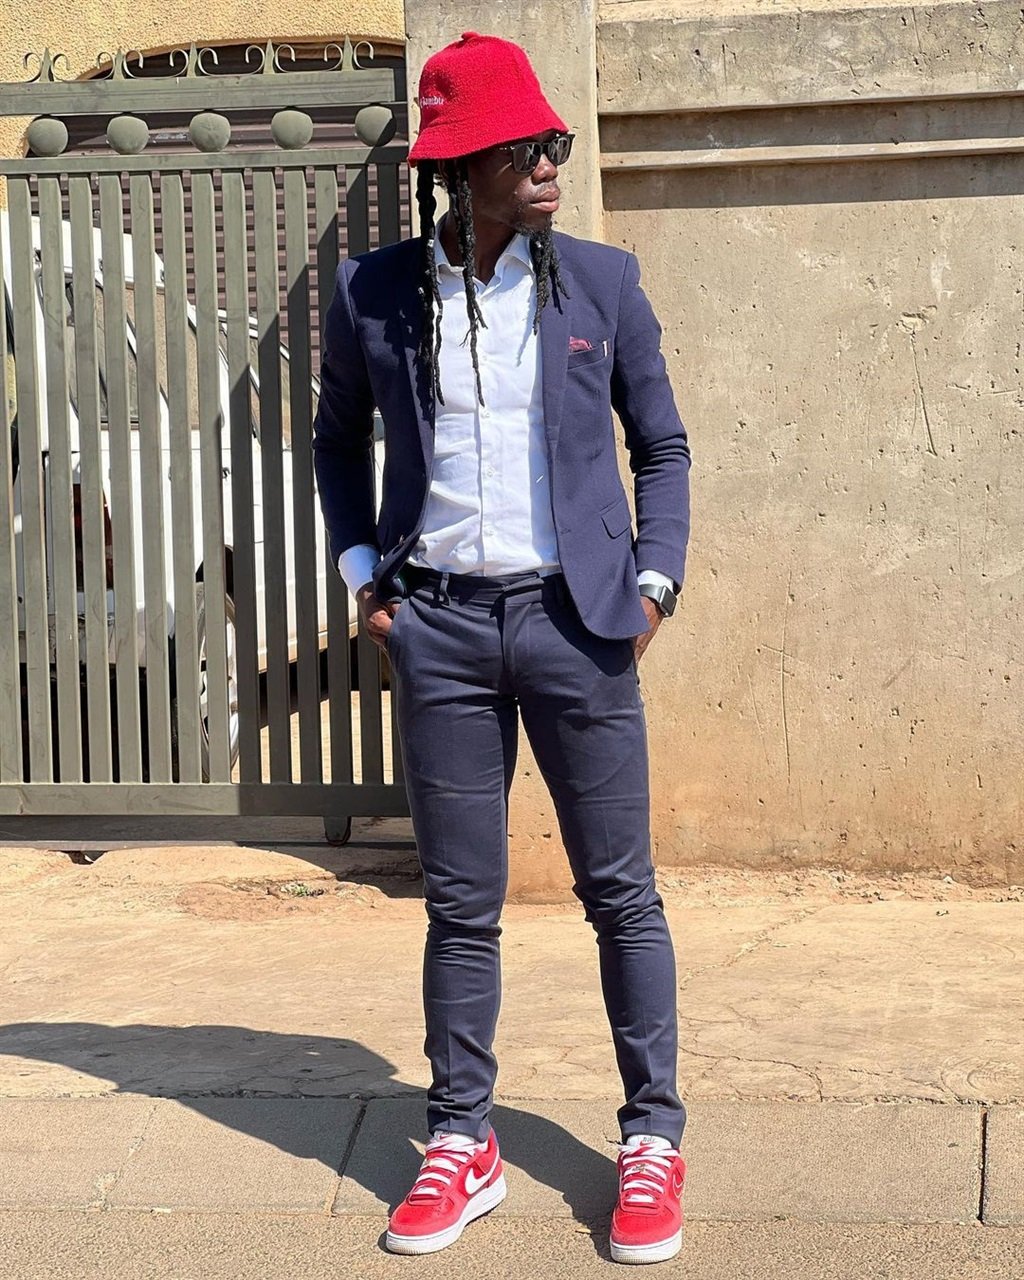 Yeye rocking a navy suit and some stand-out red pi